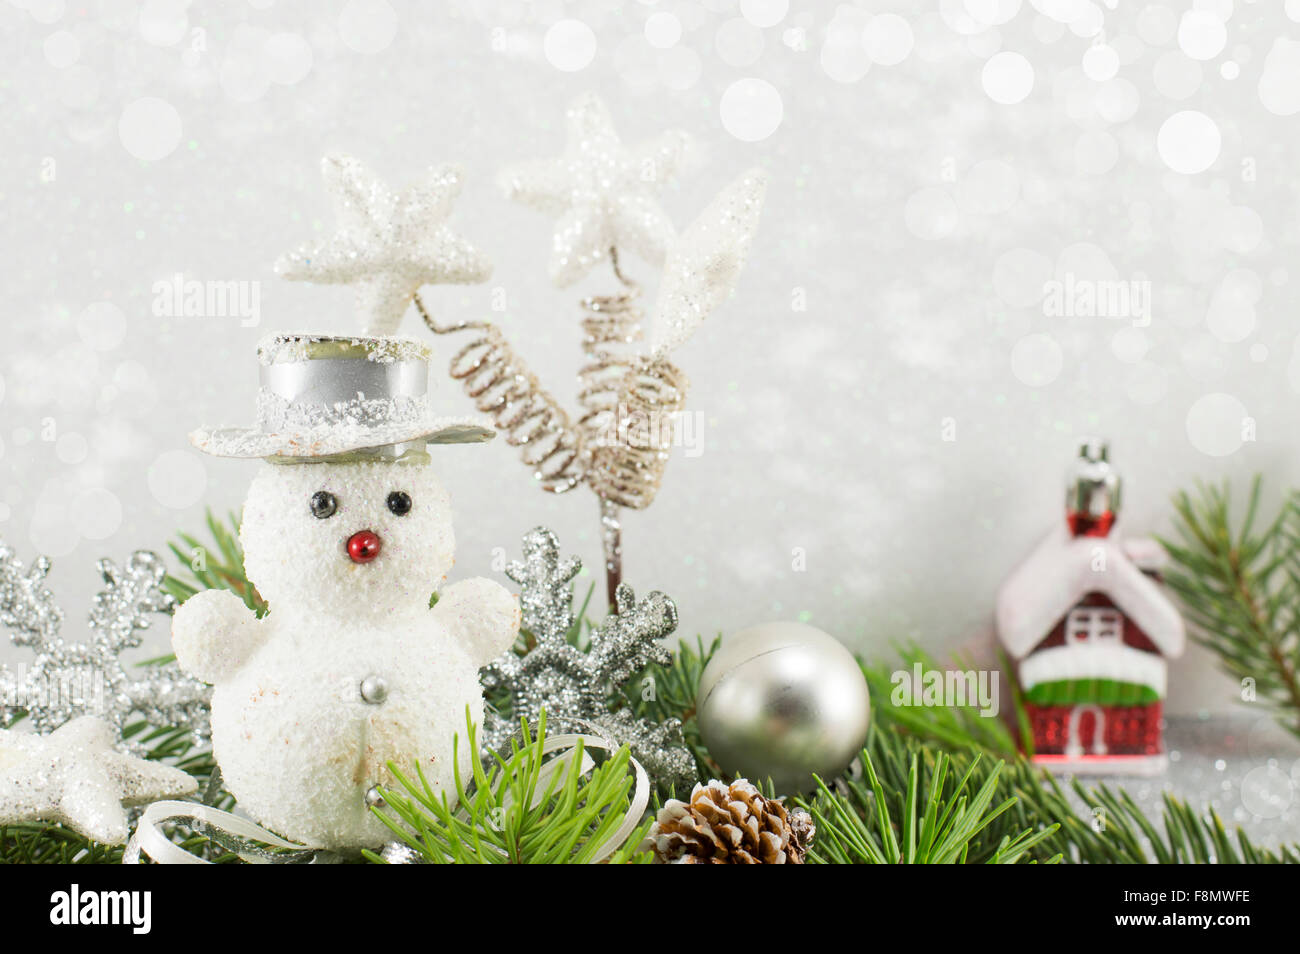 Toy snowman in his imaginary miniature world with shiny winter background Stock Photo